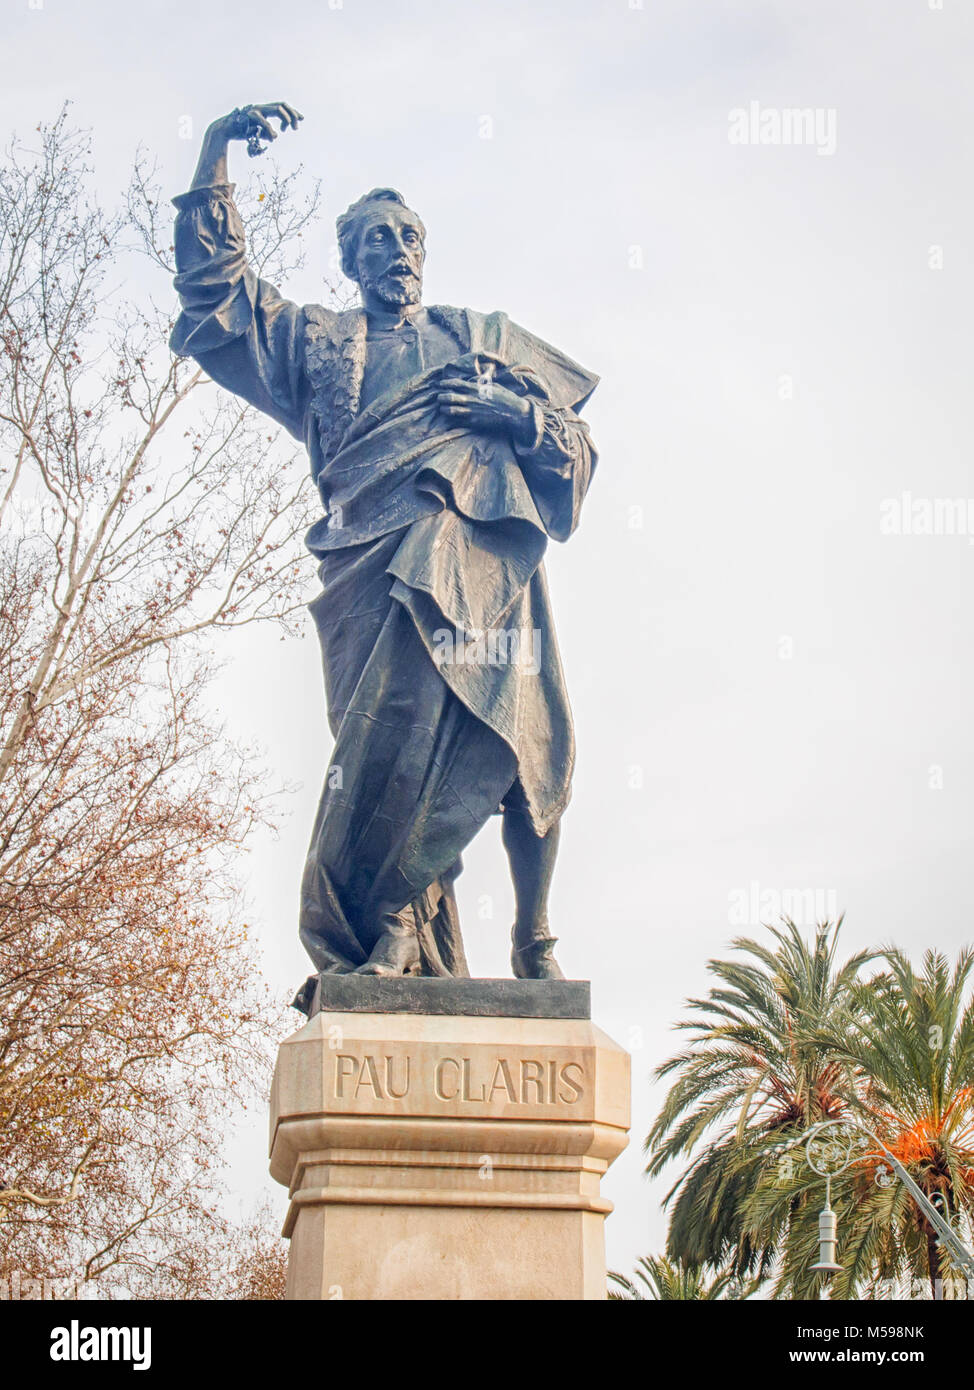 Statue of Pau Claris - the President of Catalonia at the start of the Catalan Revolt. The Pau Claris statue is the work of Catalan Art Nouveau sculpto Stock Photo